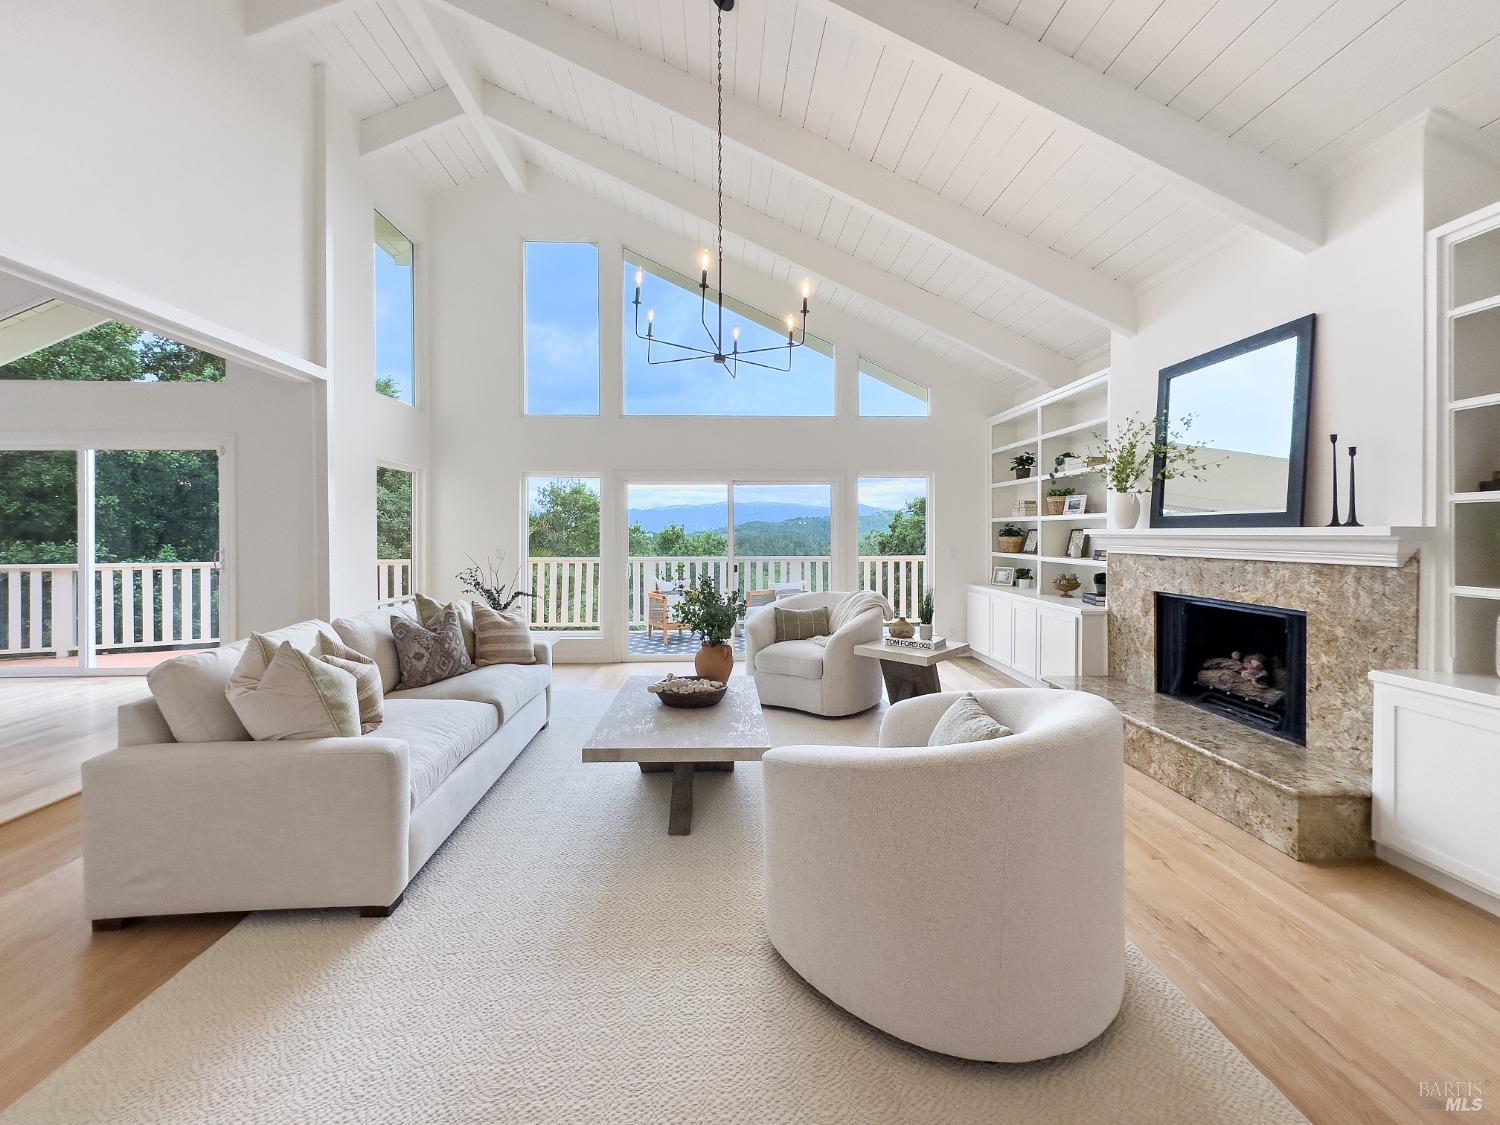 Dramatic and grand living room with cathedral ceiling, fireplace and a deck to enjoy the spectacular views. There are hardwood floors throughout the home